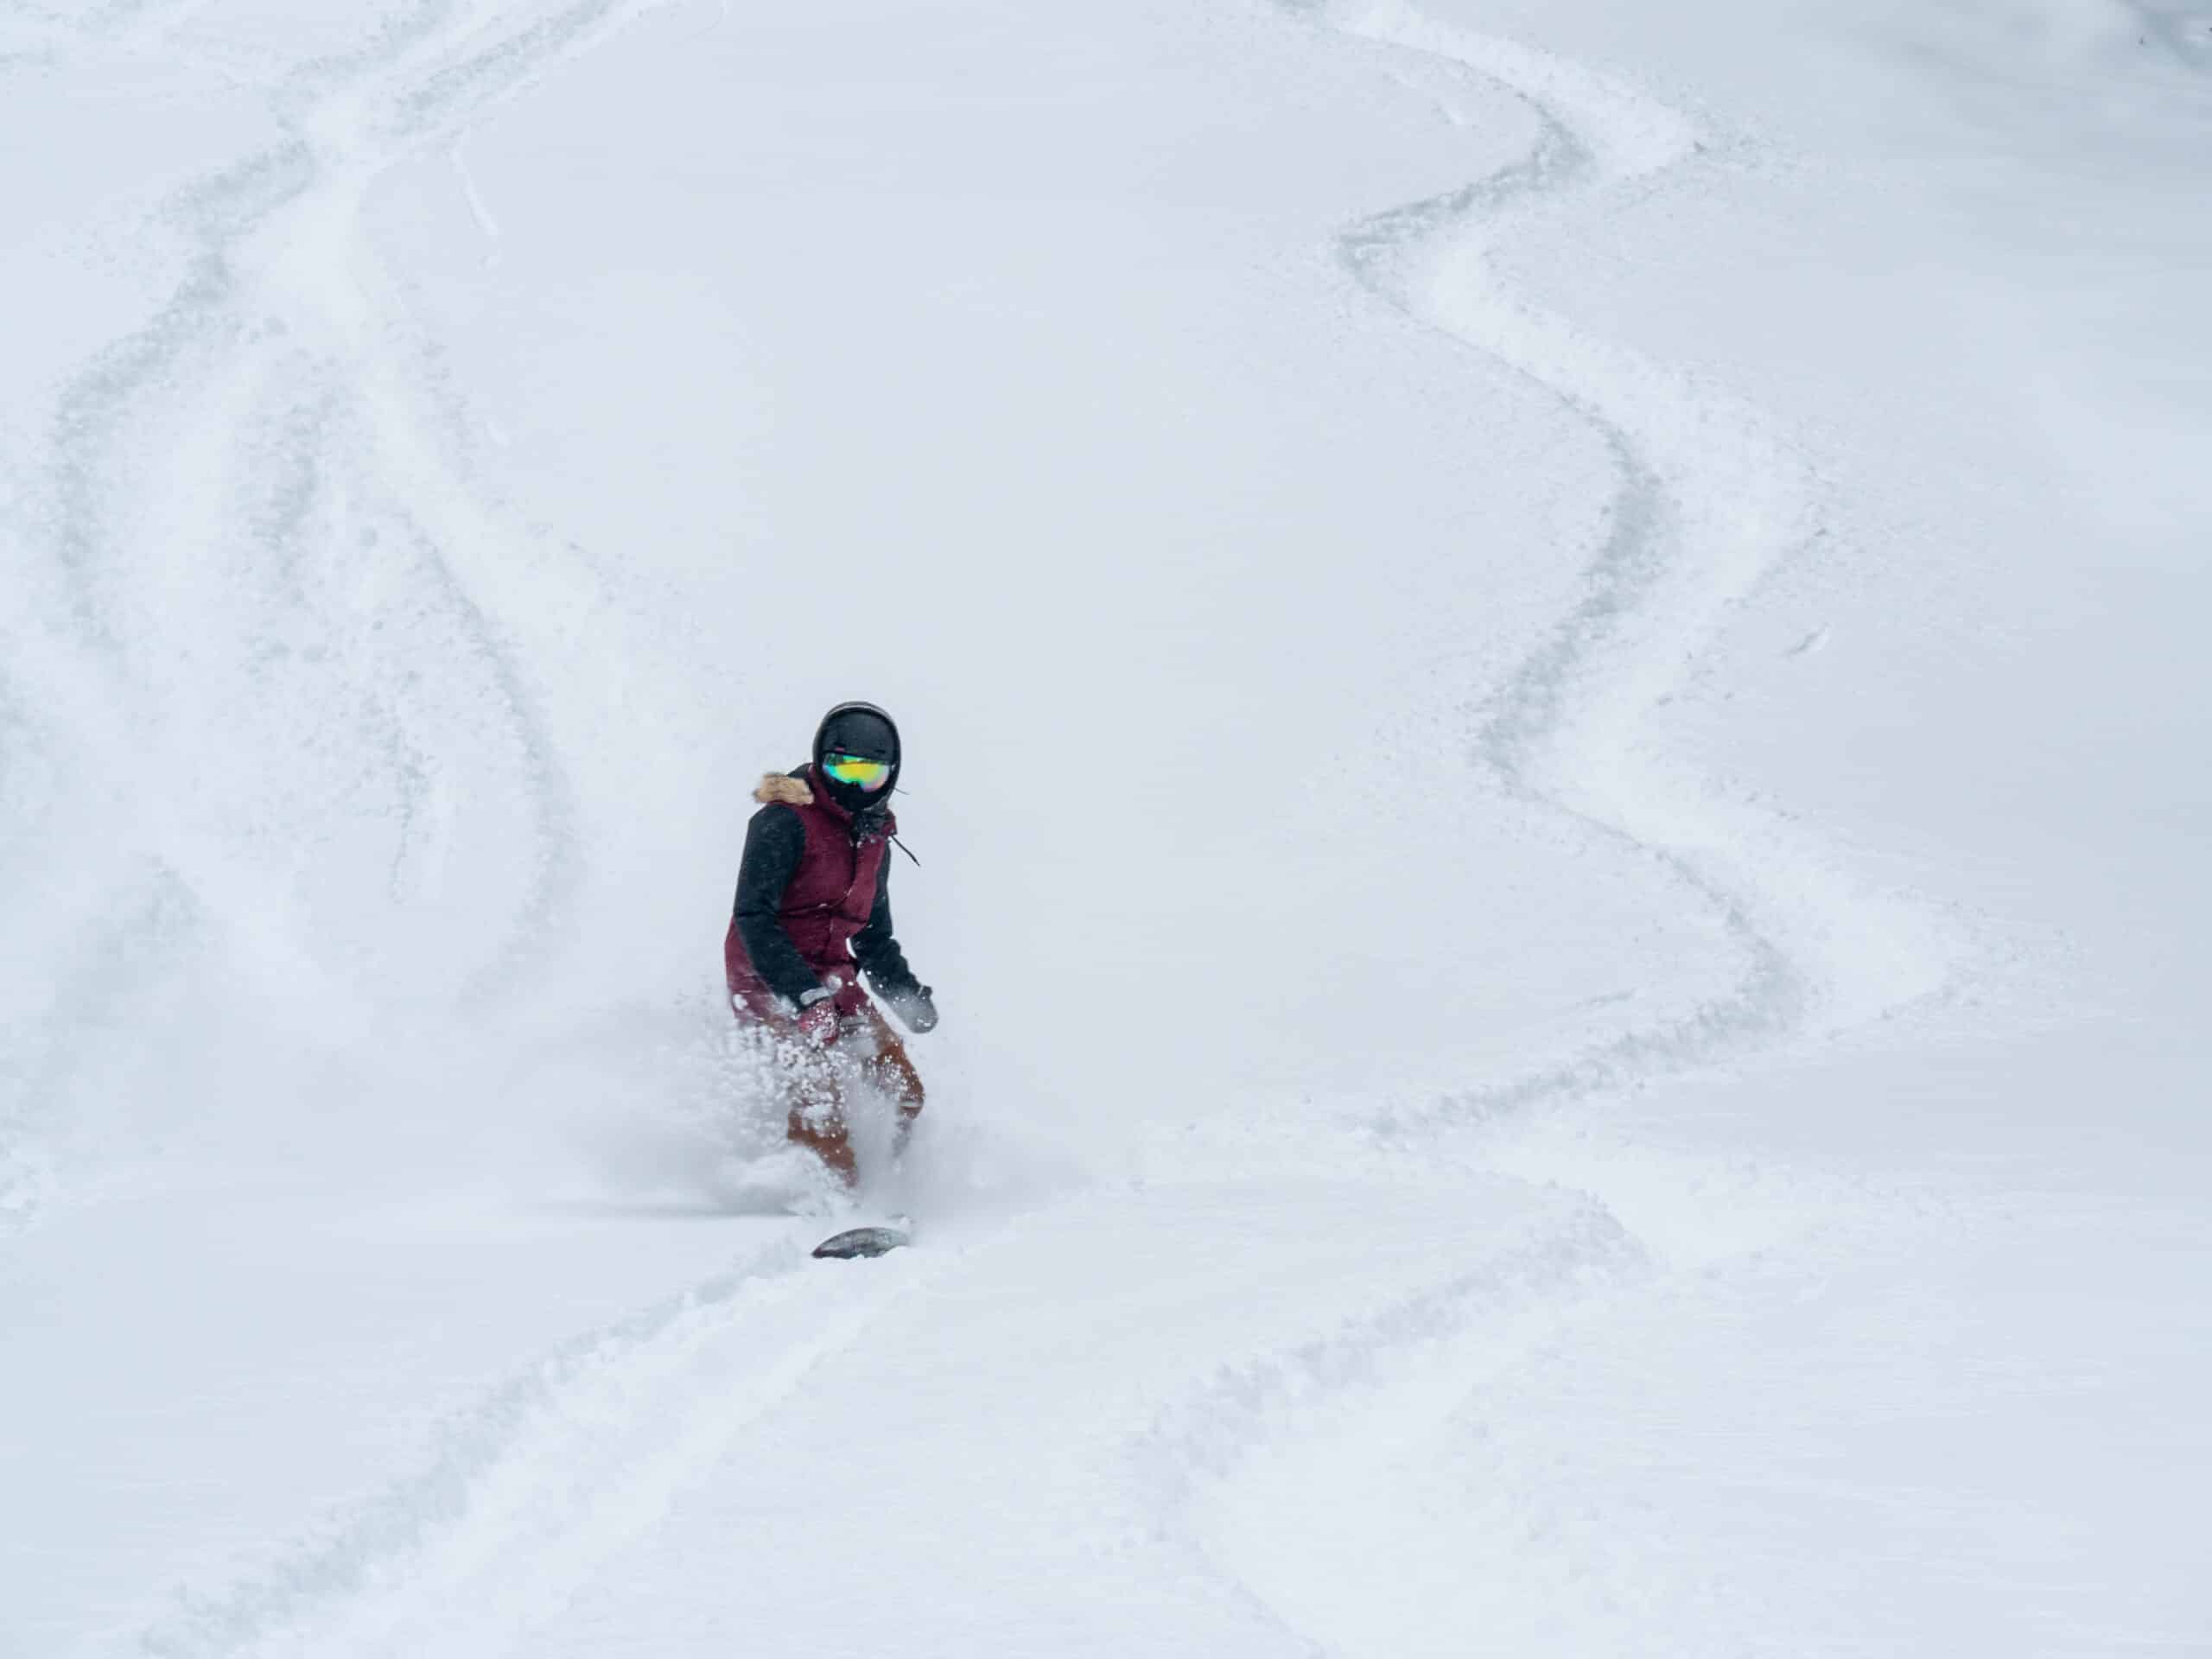 A Snowboarder leaves tracks in the powder on a snowy slope